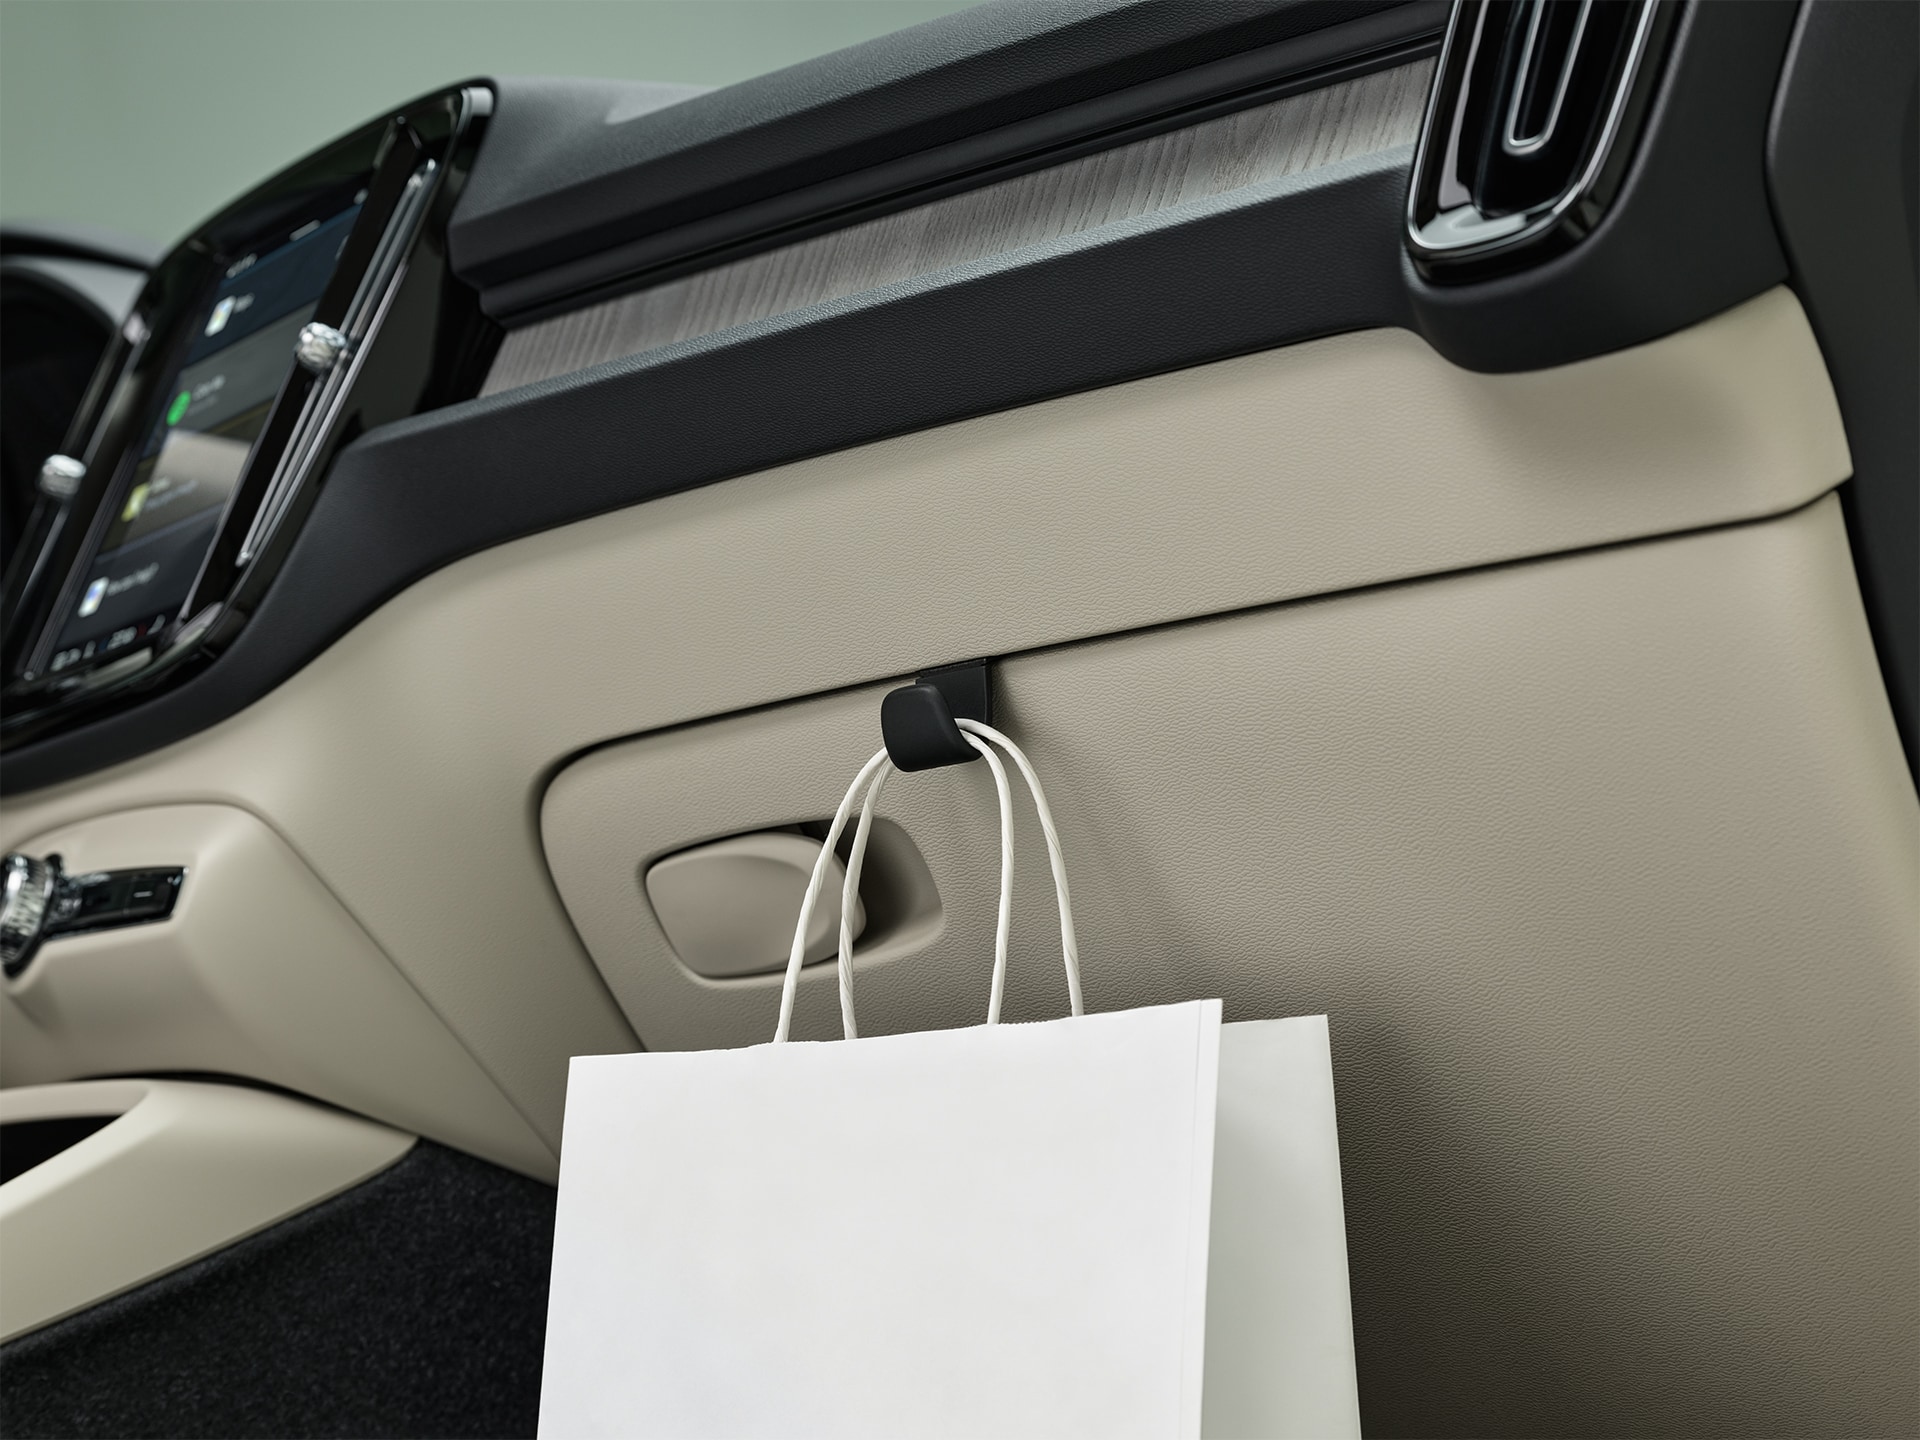 Smart interior storage and design solutions in the XC40 SUV.